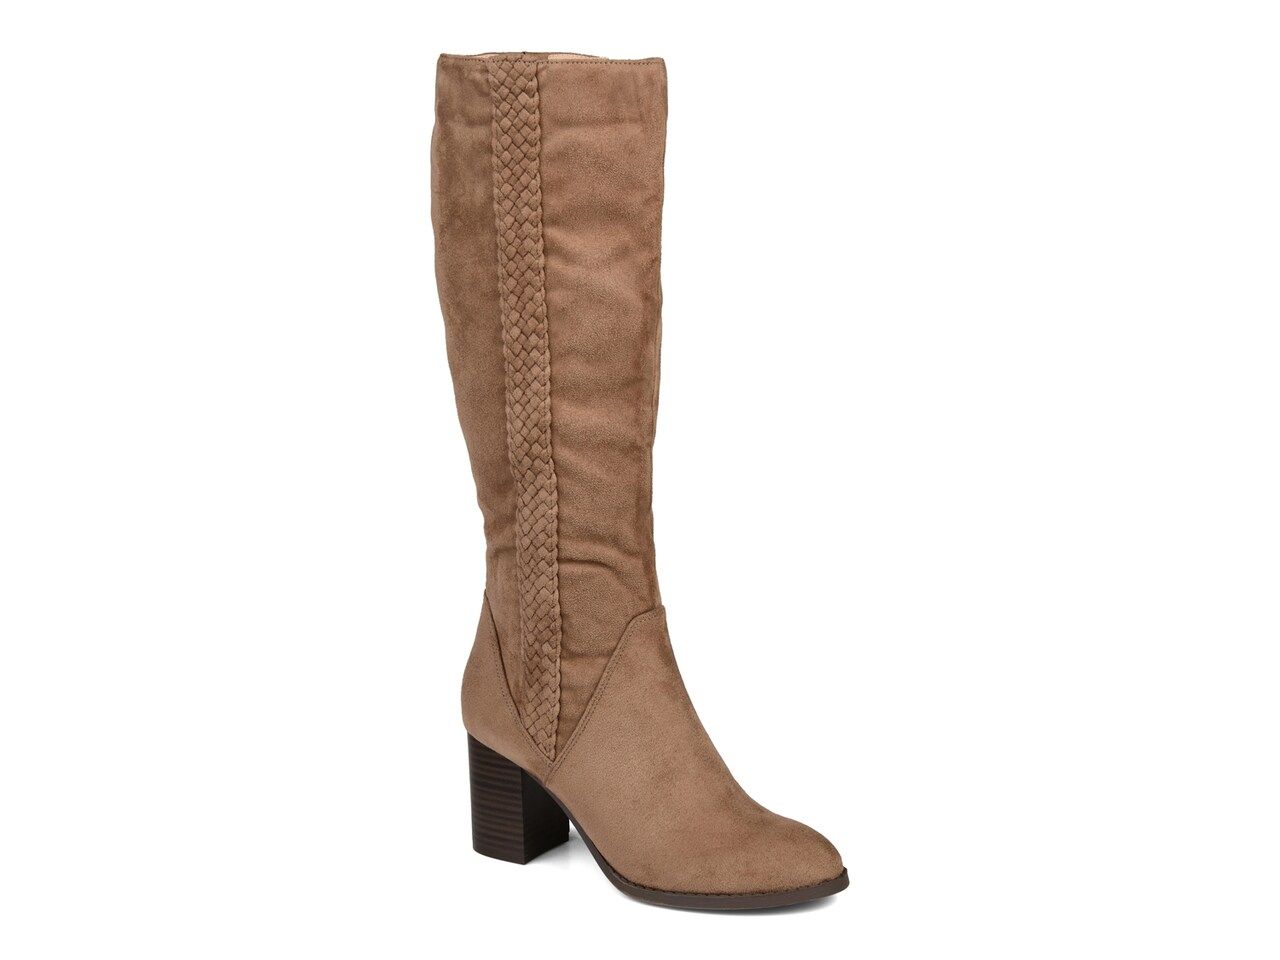 Journee Collection Gentri Extra Wide Calf Boot | DSW